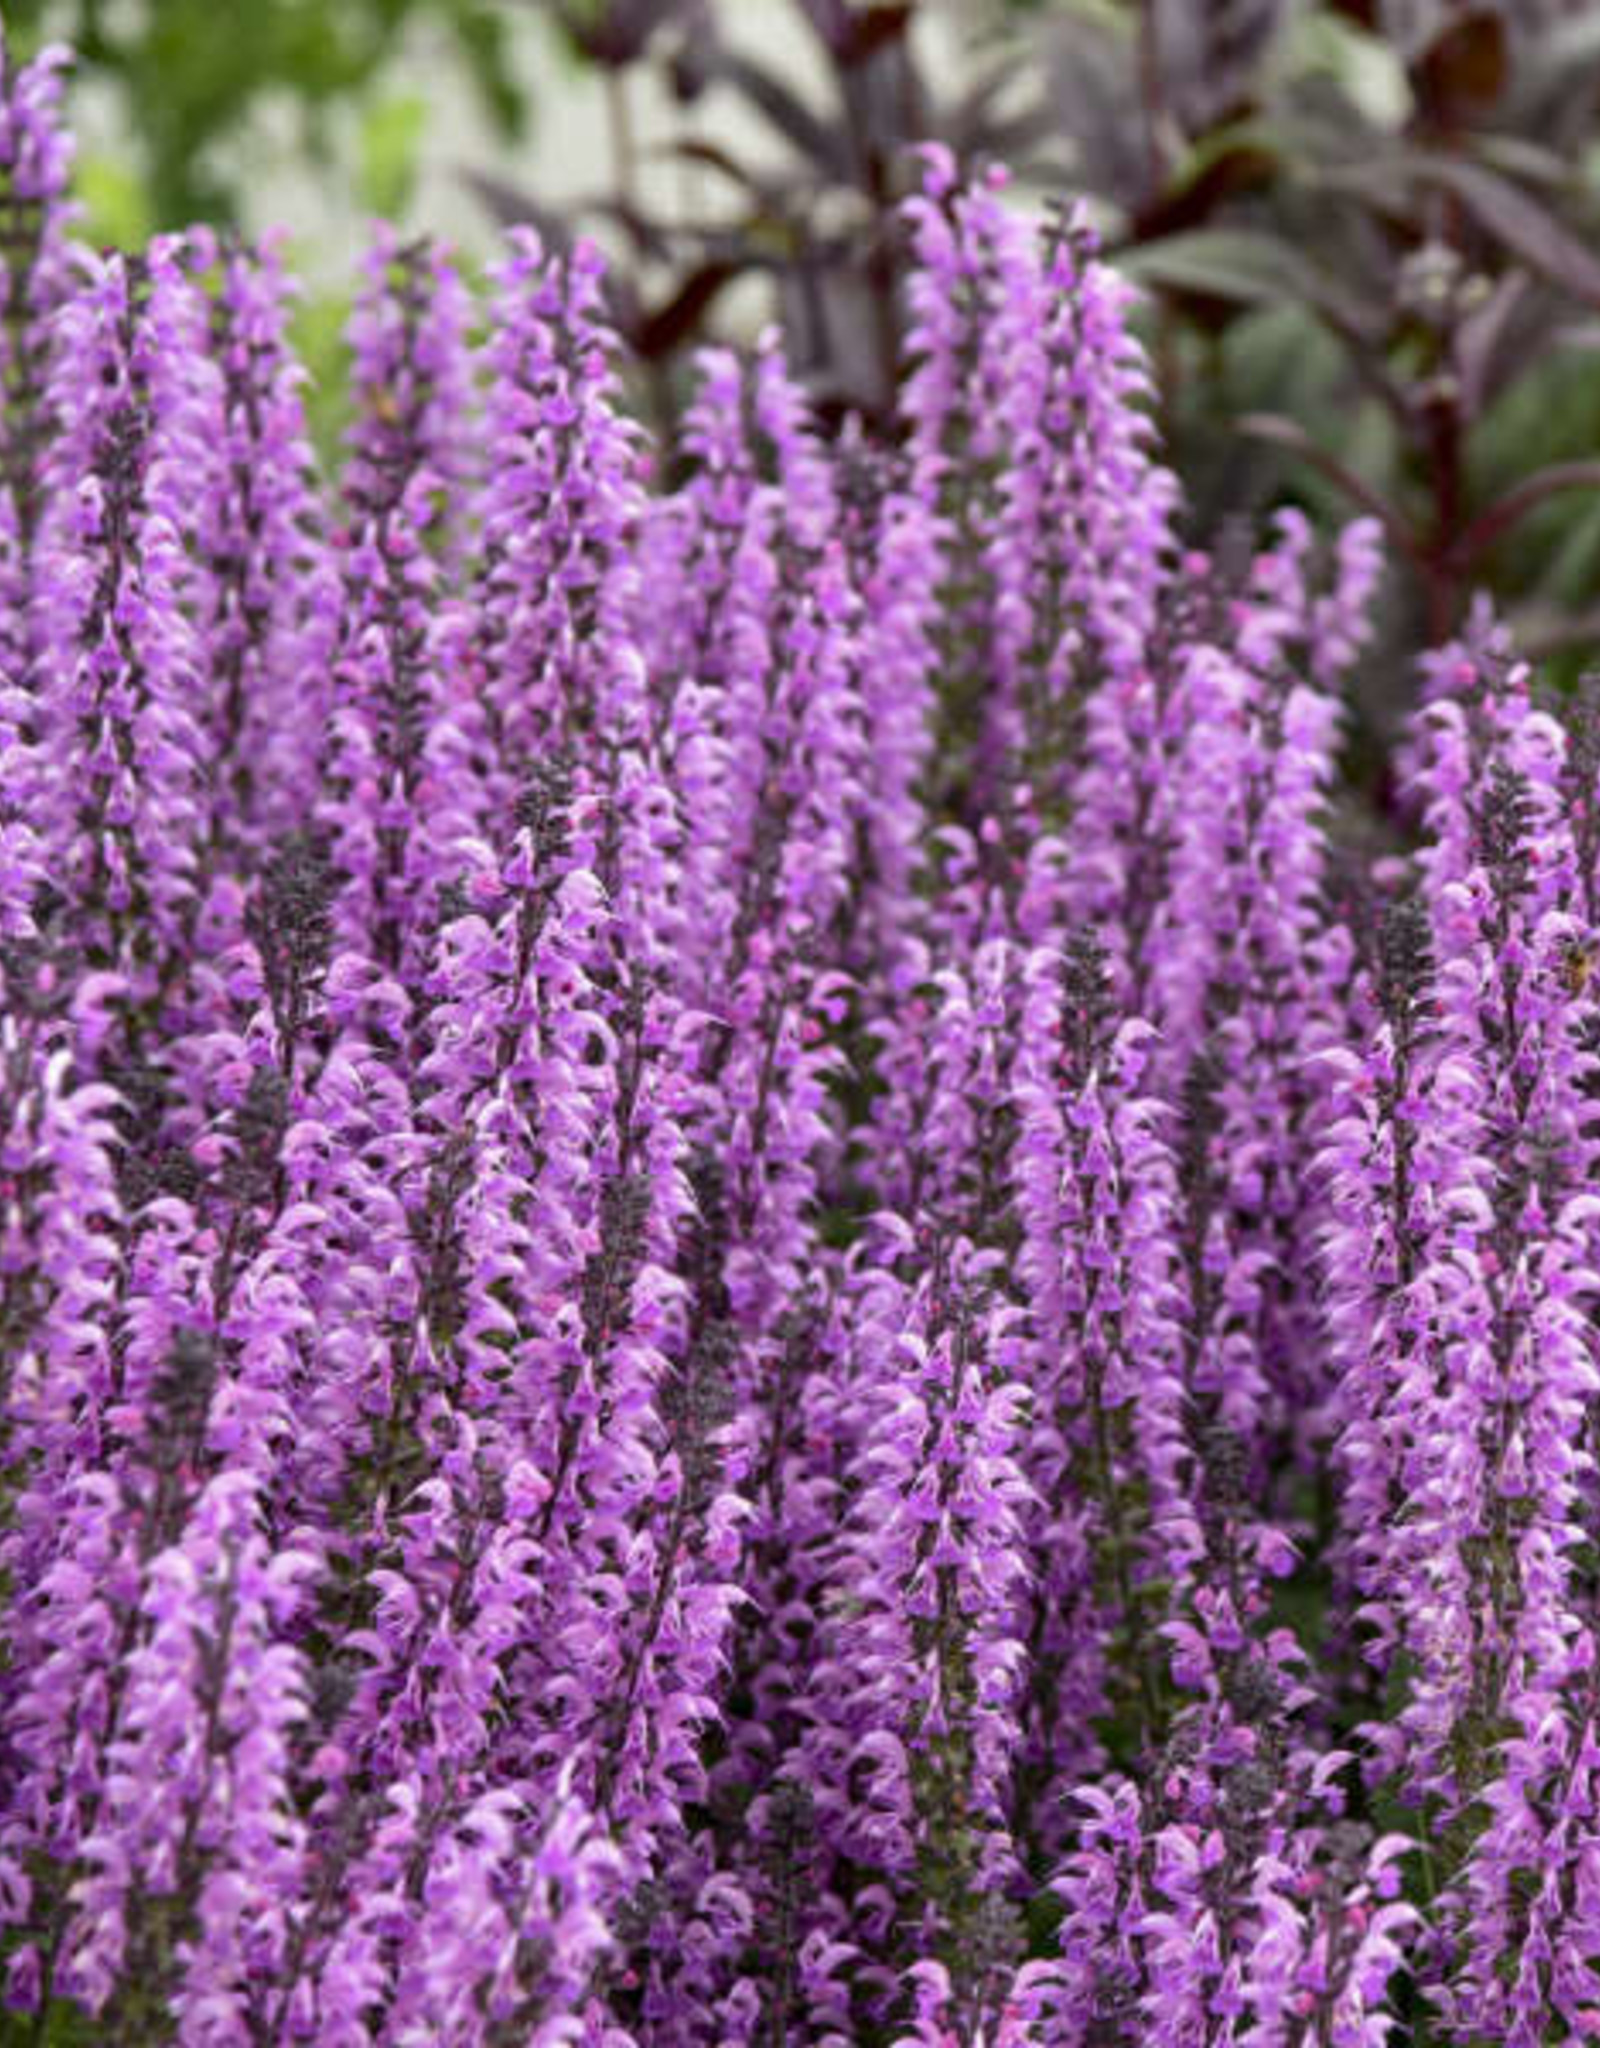 Proven Winners Salvia COLOR SPIRES 'Back to the Fuchsia' #1 PW